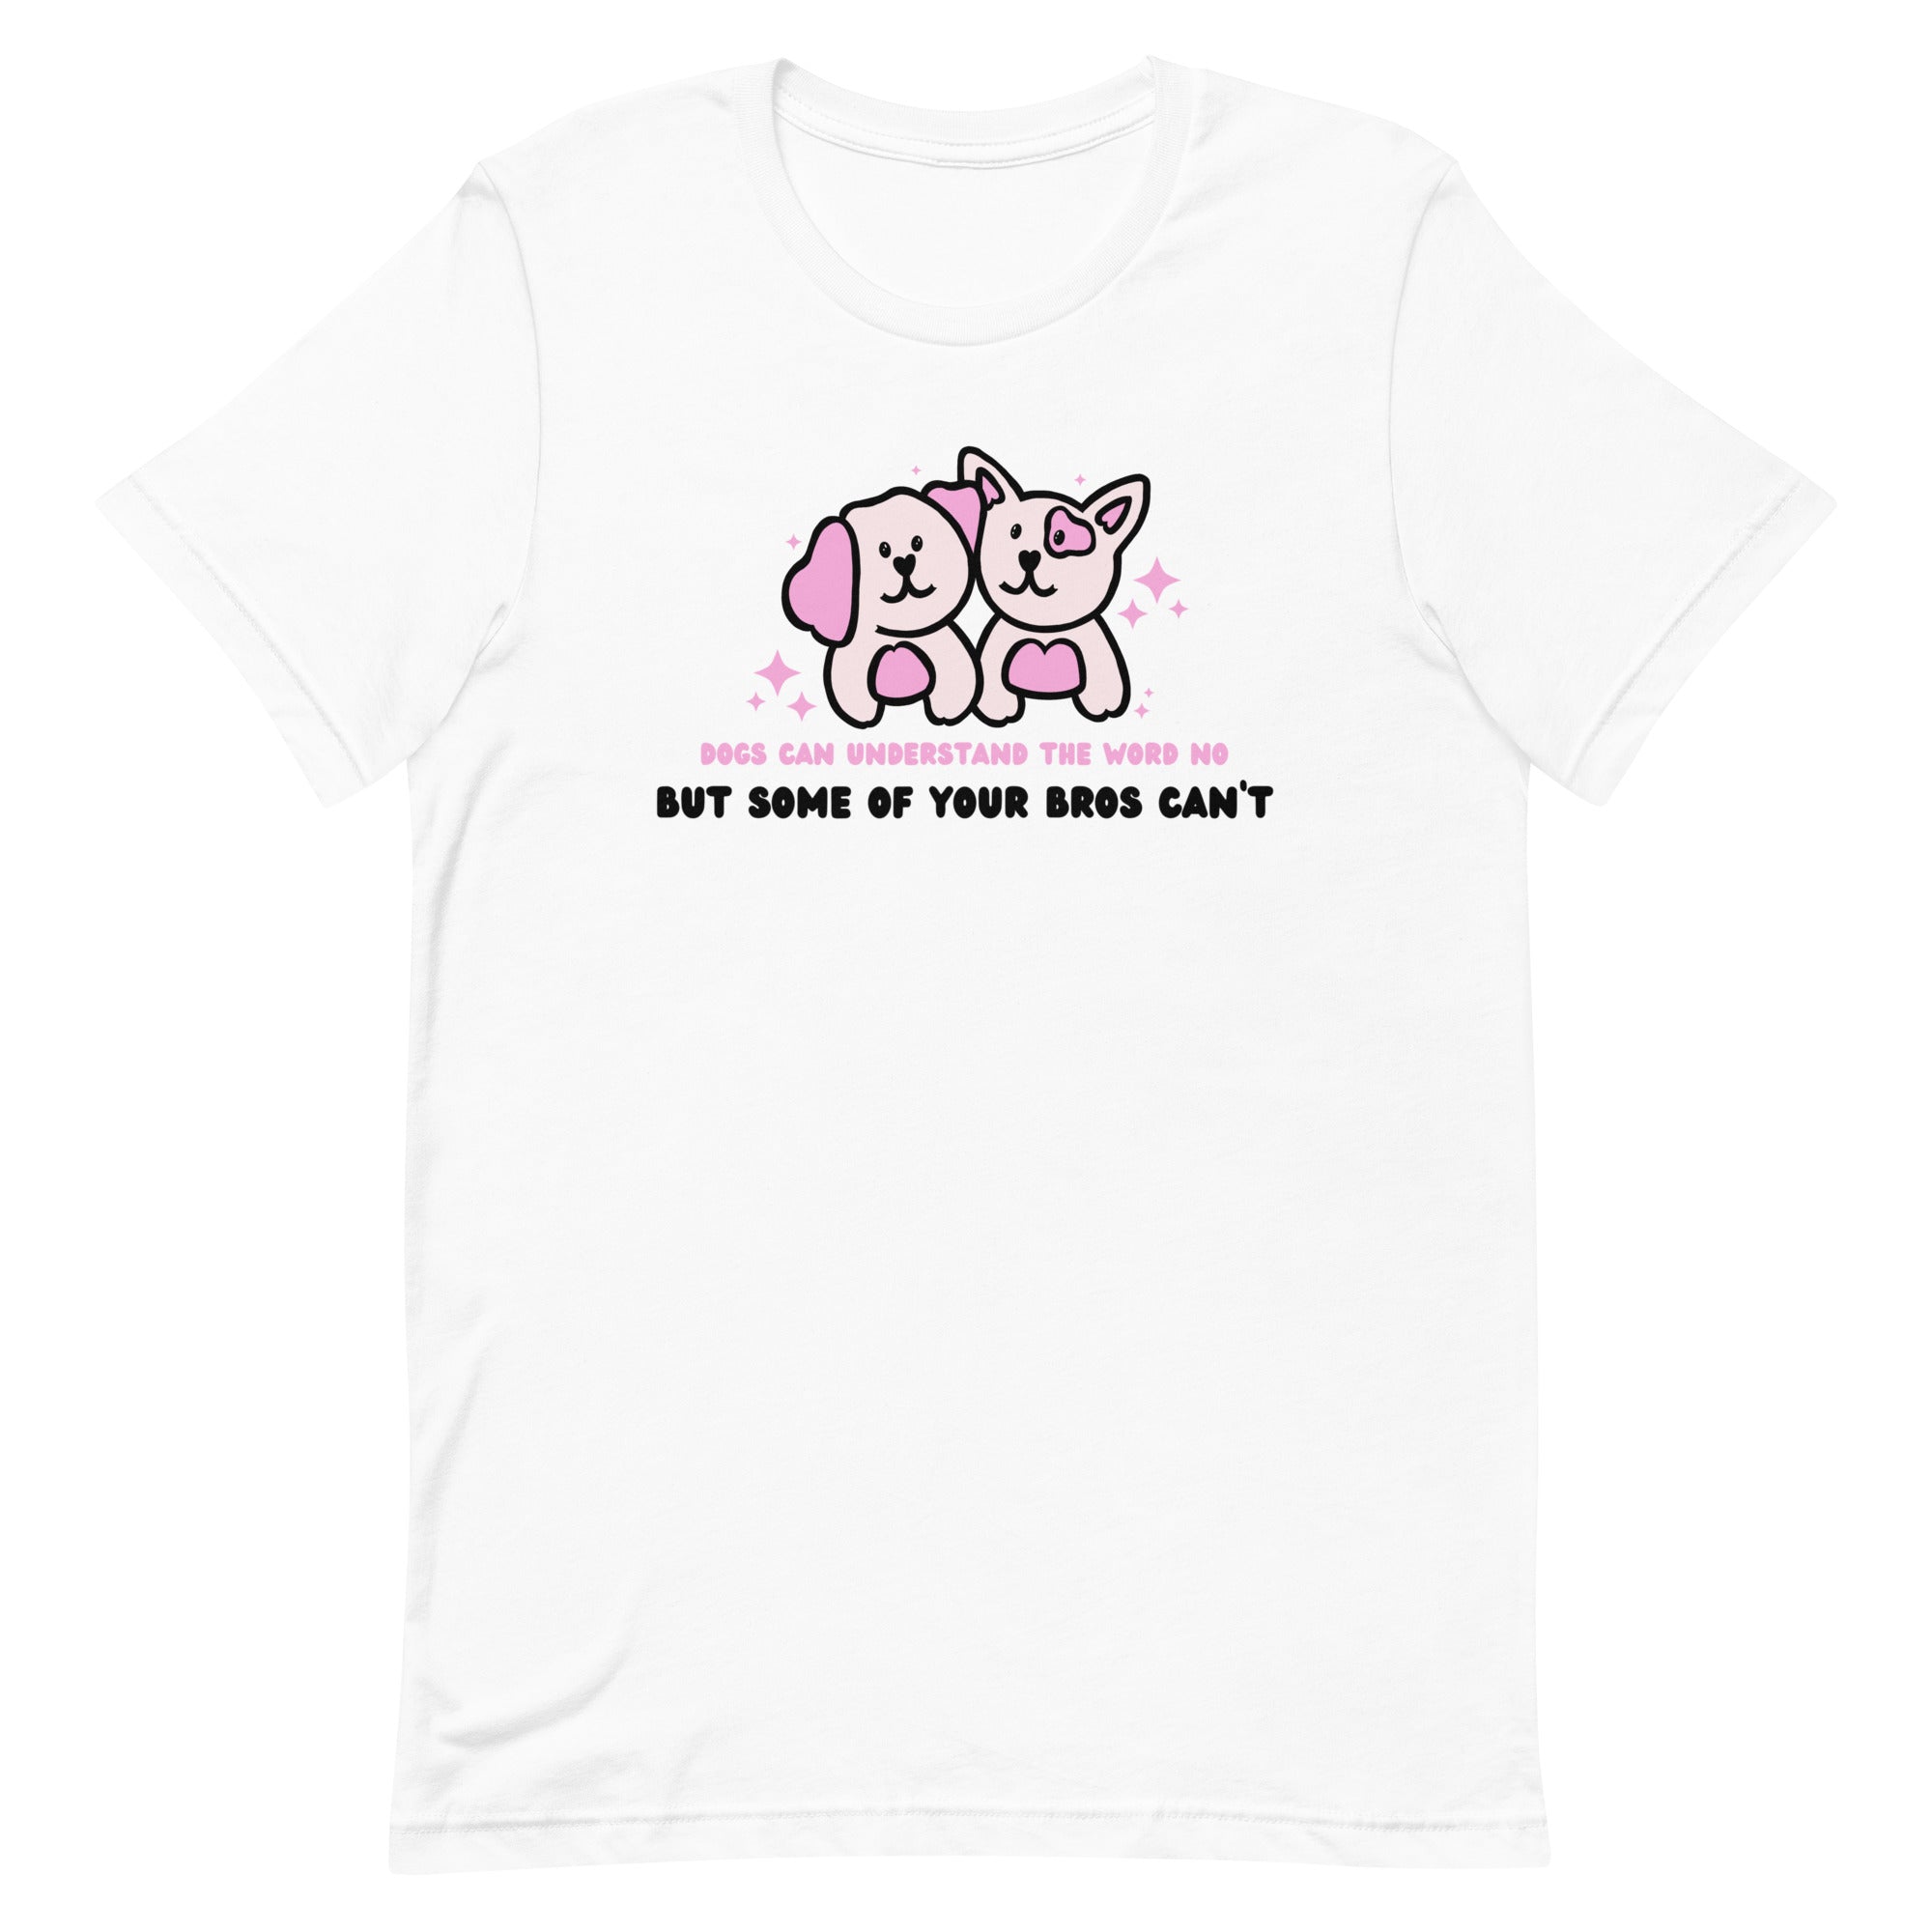 Dogs Can Understand The Word No But Some Of Your Bros Can’t Unisex Feminist t-shirt - Shop Women’s Rights T-shirts - Feminist Trash Store - White